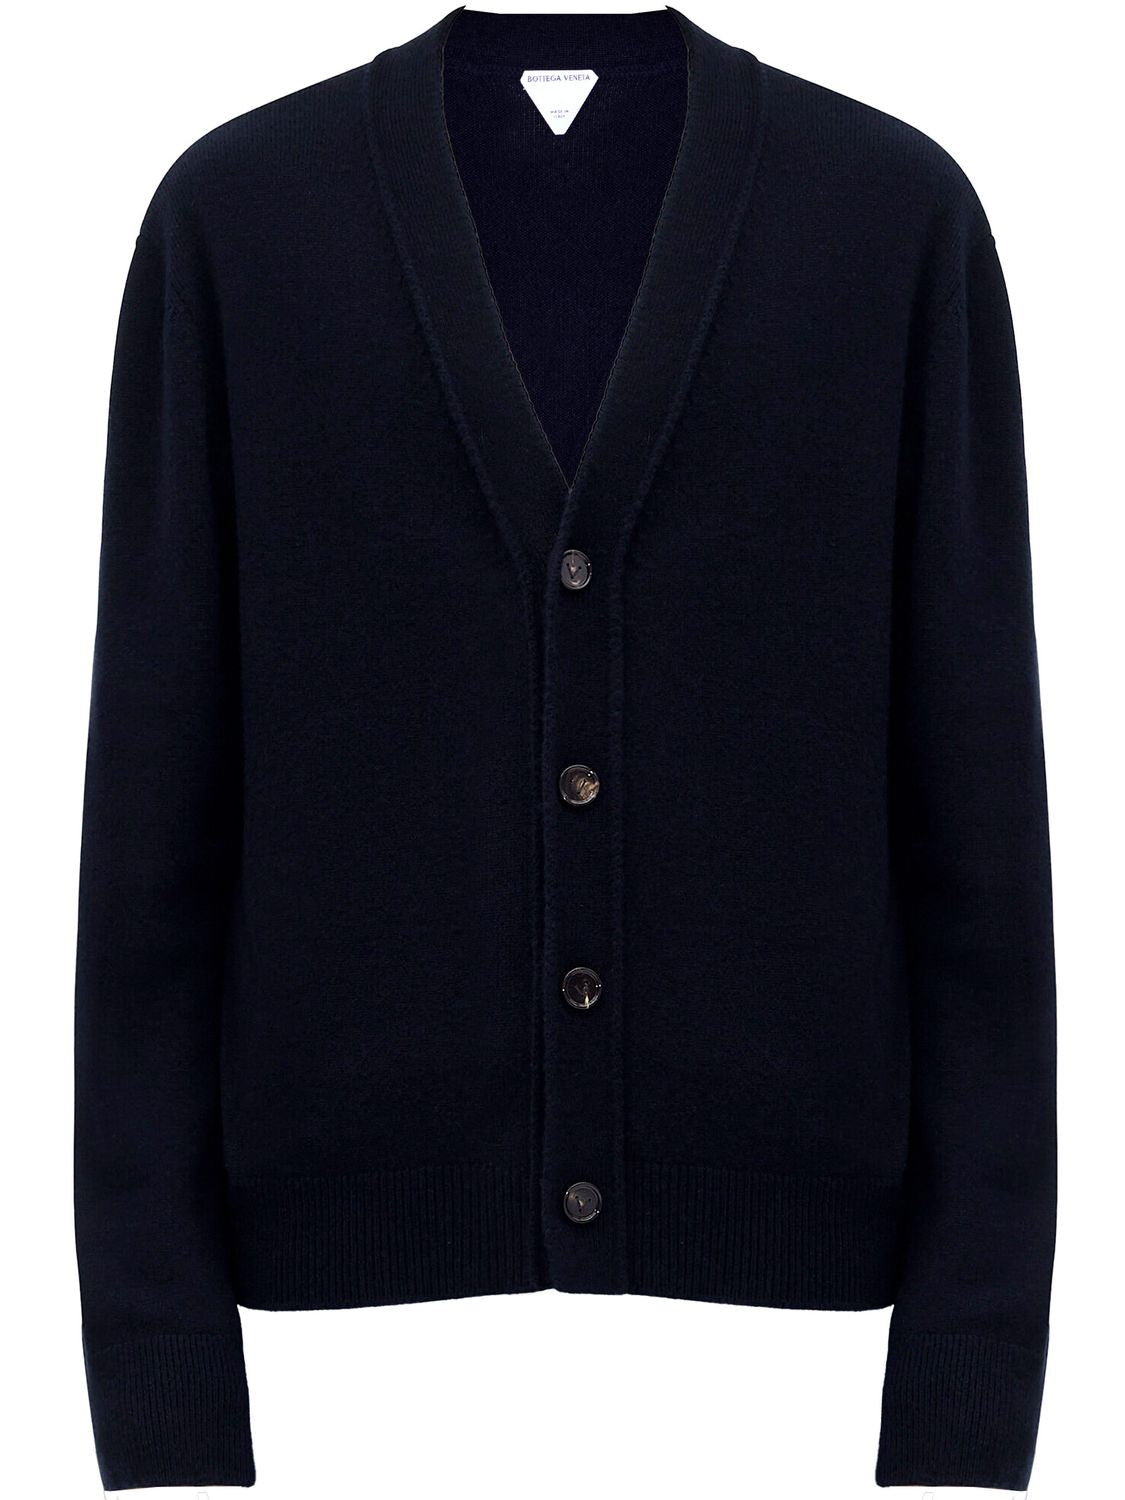 Bold Blue Cashmere Cardigan with Leather Patches and Intreccio Motif